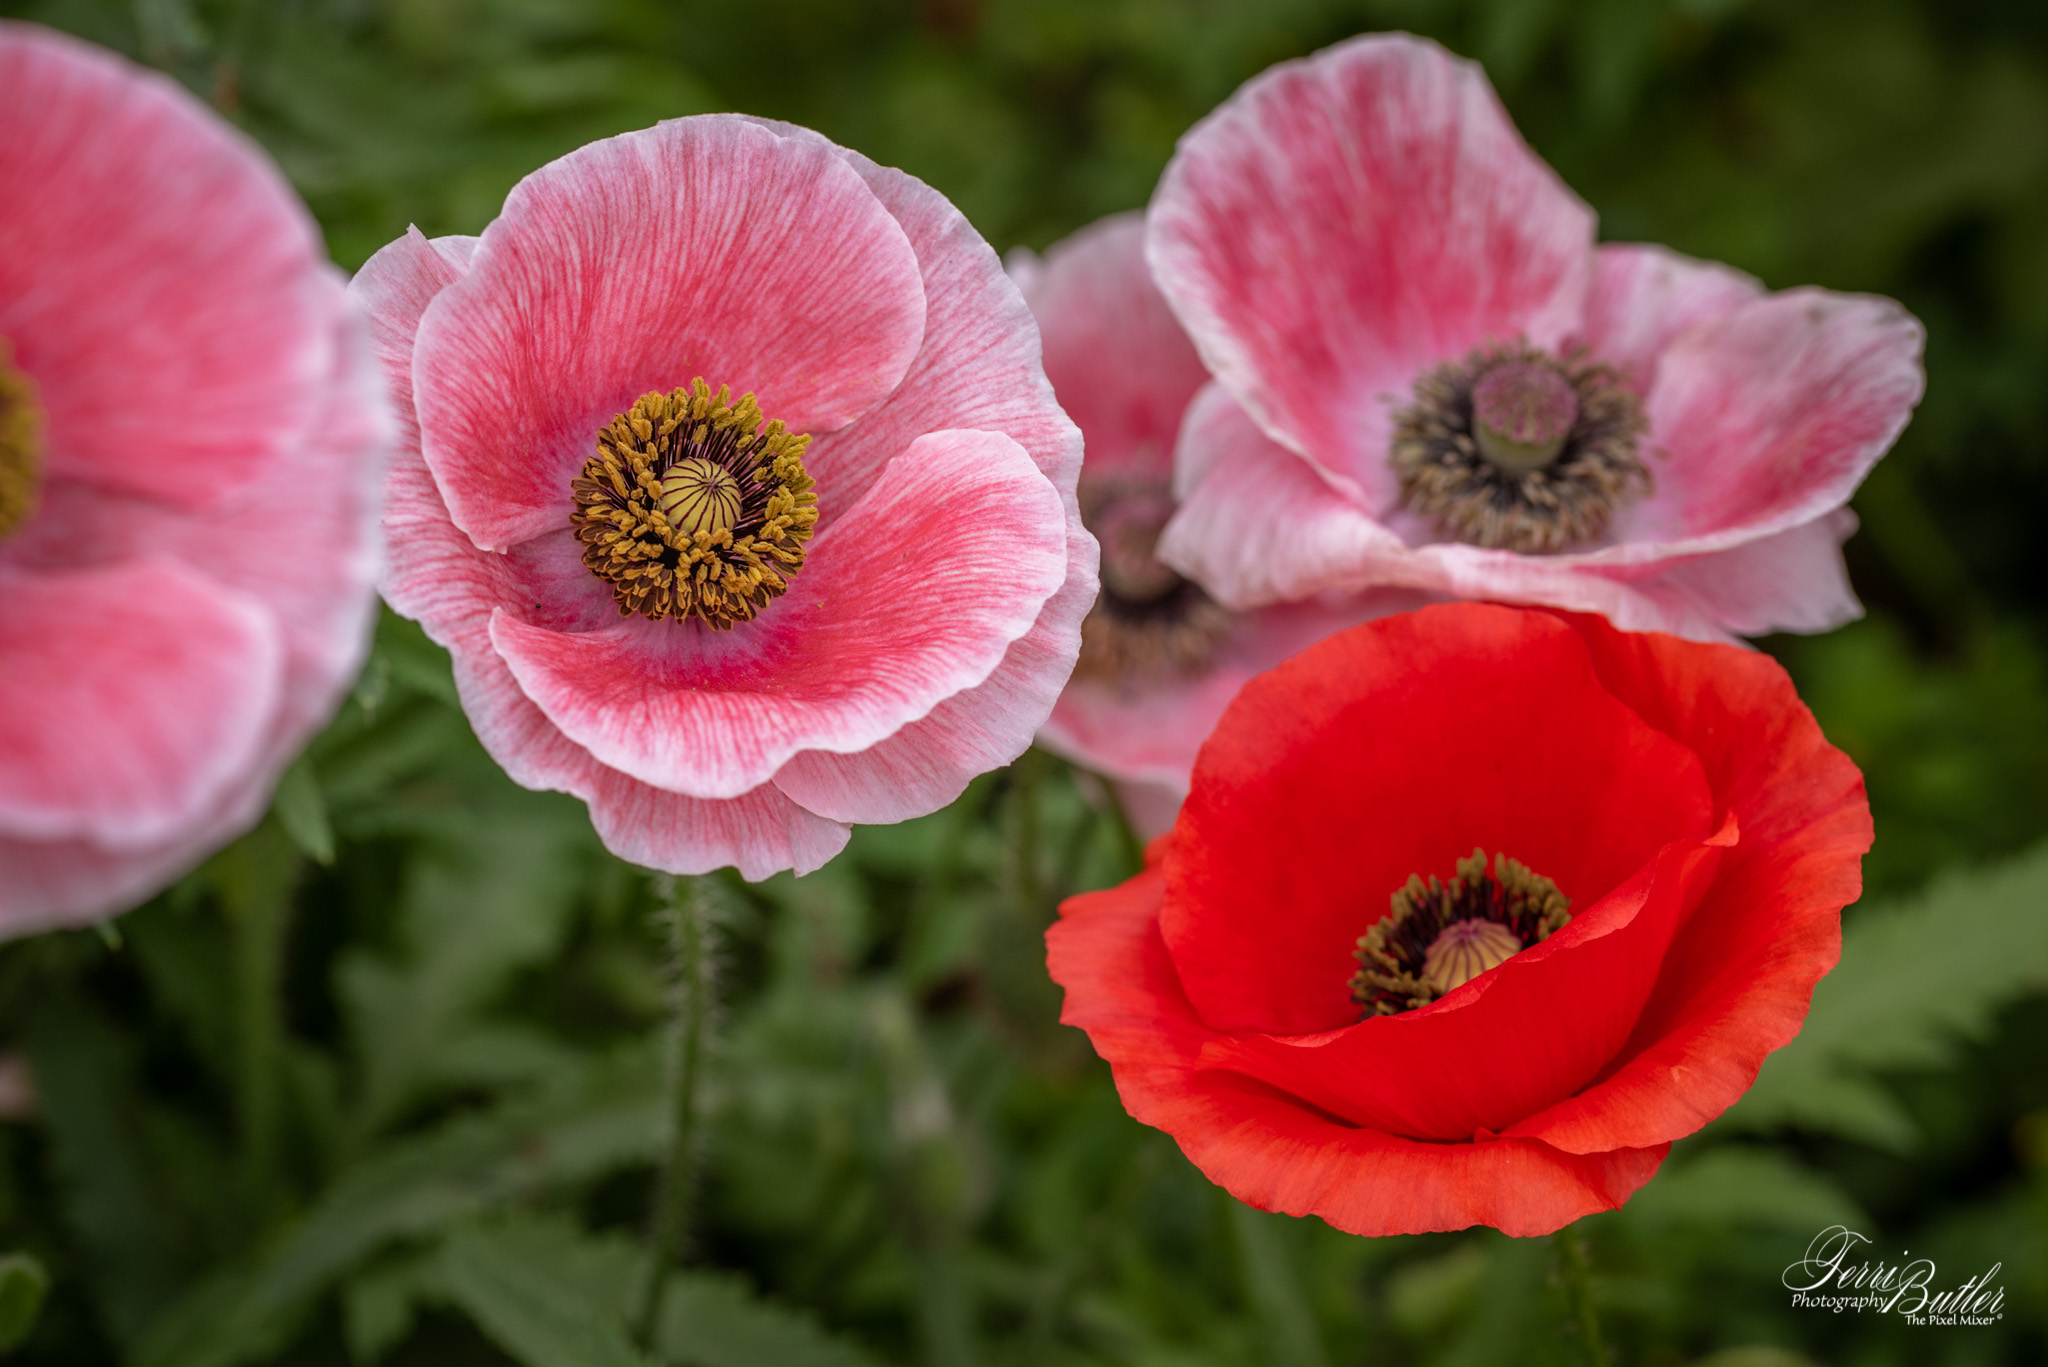 Poppies, Poppies and More Poppies